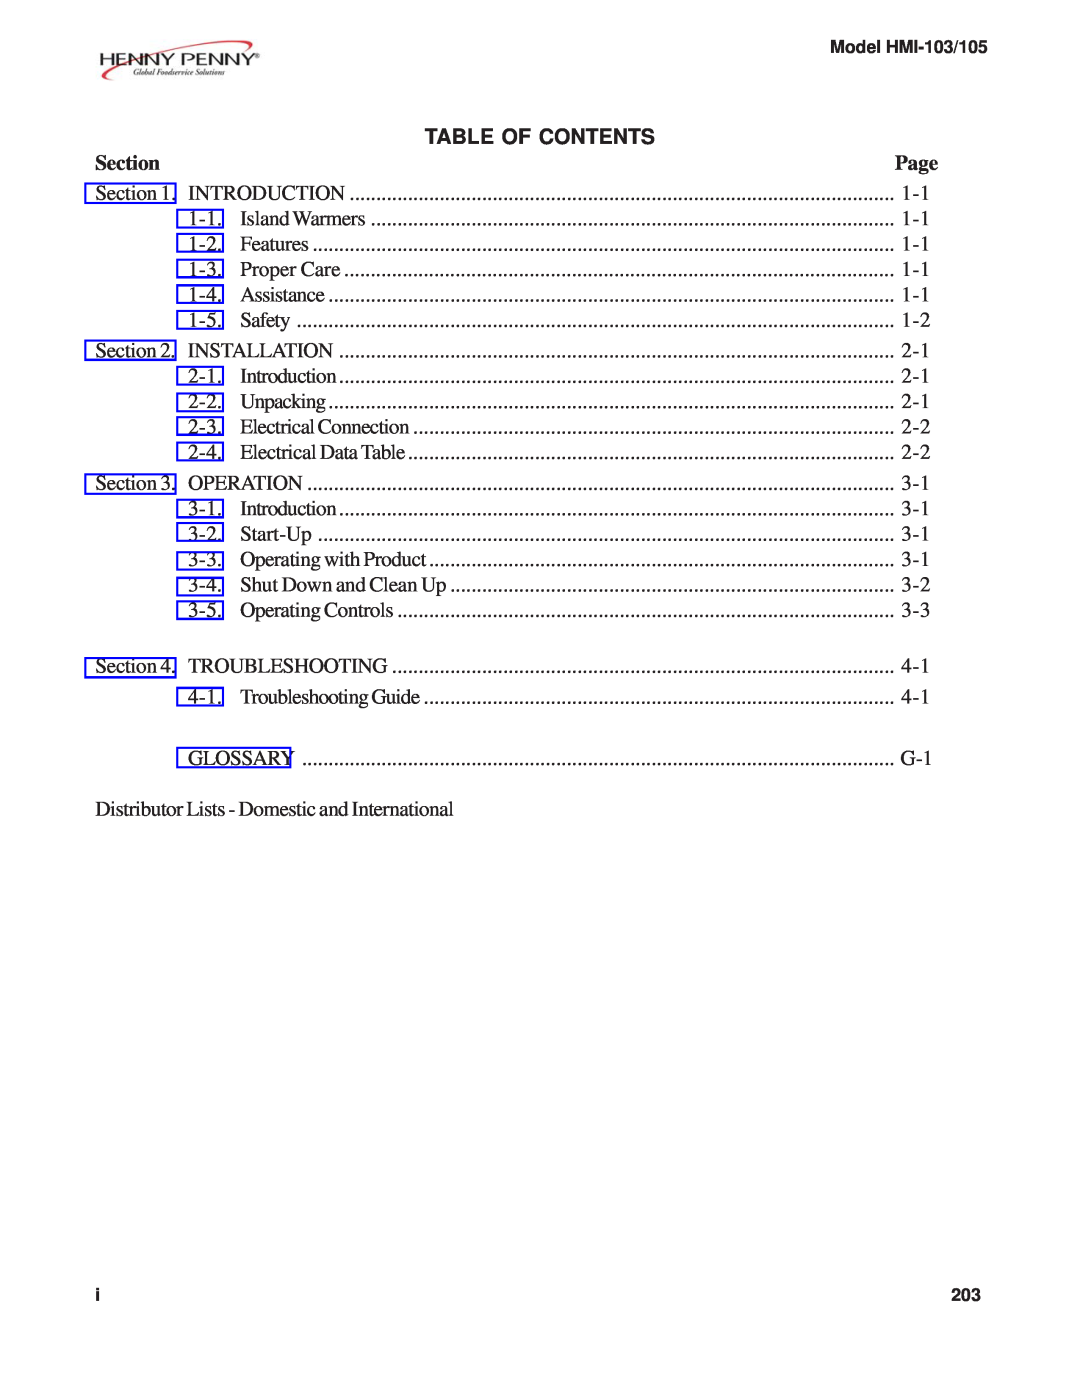 Henny Penny HMI-105, HMI-103 manual Section, Page, Table Of Contents 